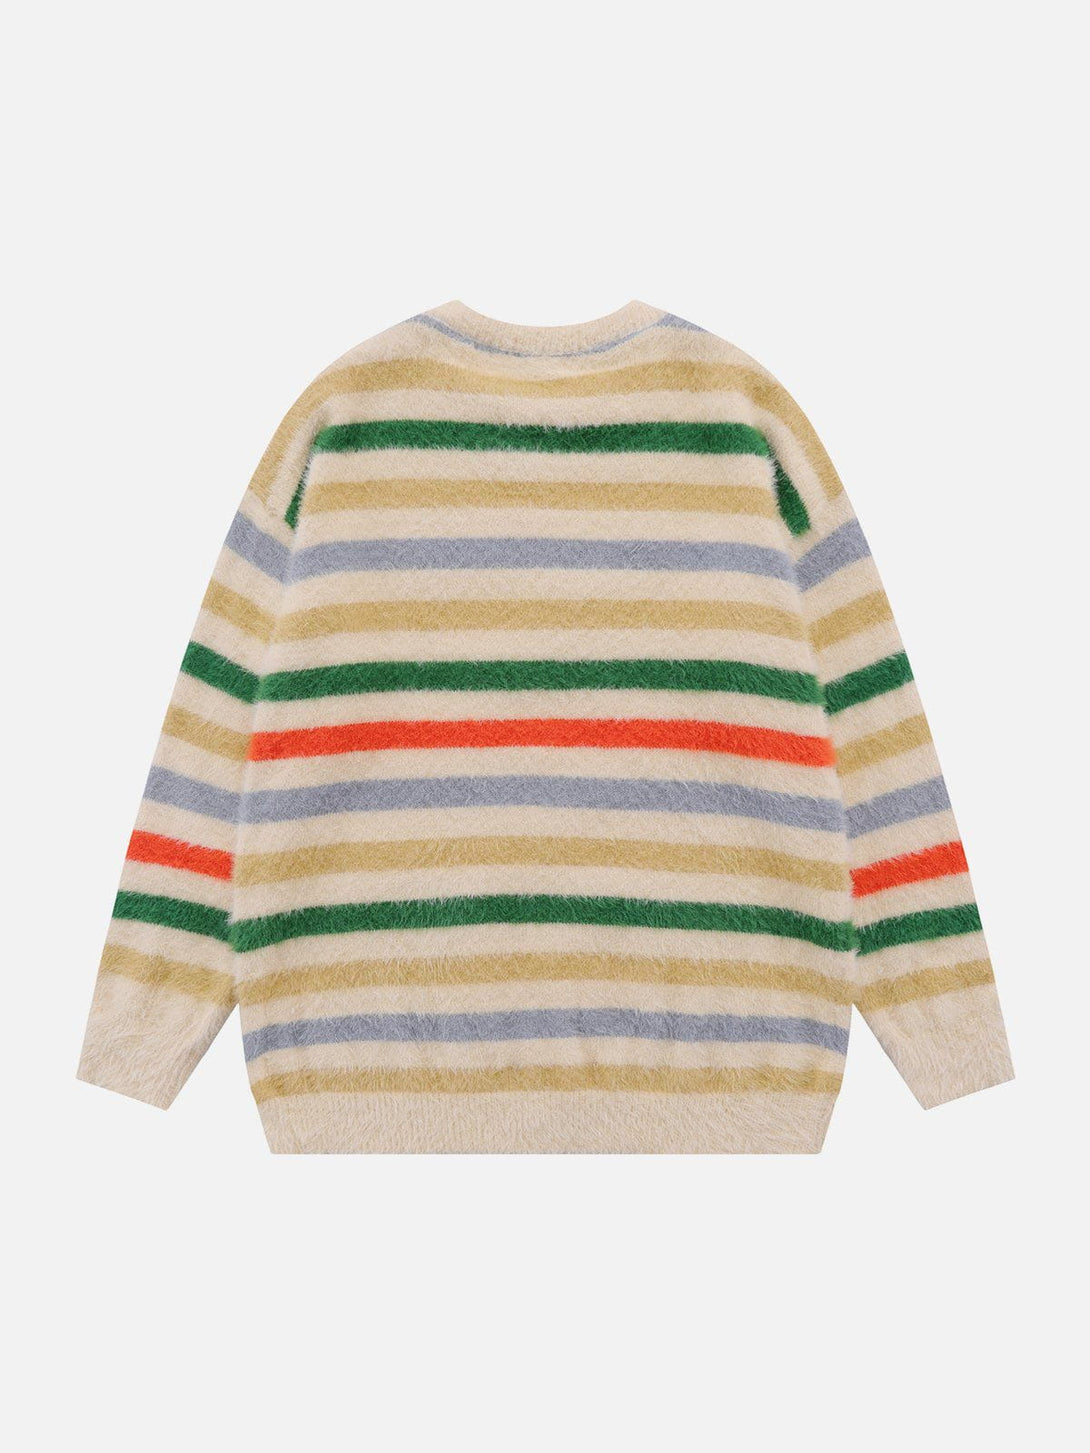 Levefly - Color Striped Star Sweater - Streetwear Fashion - levefly.com